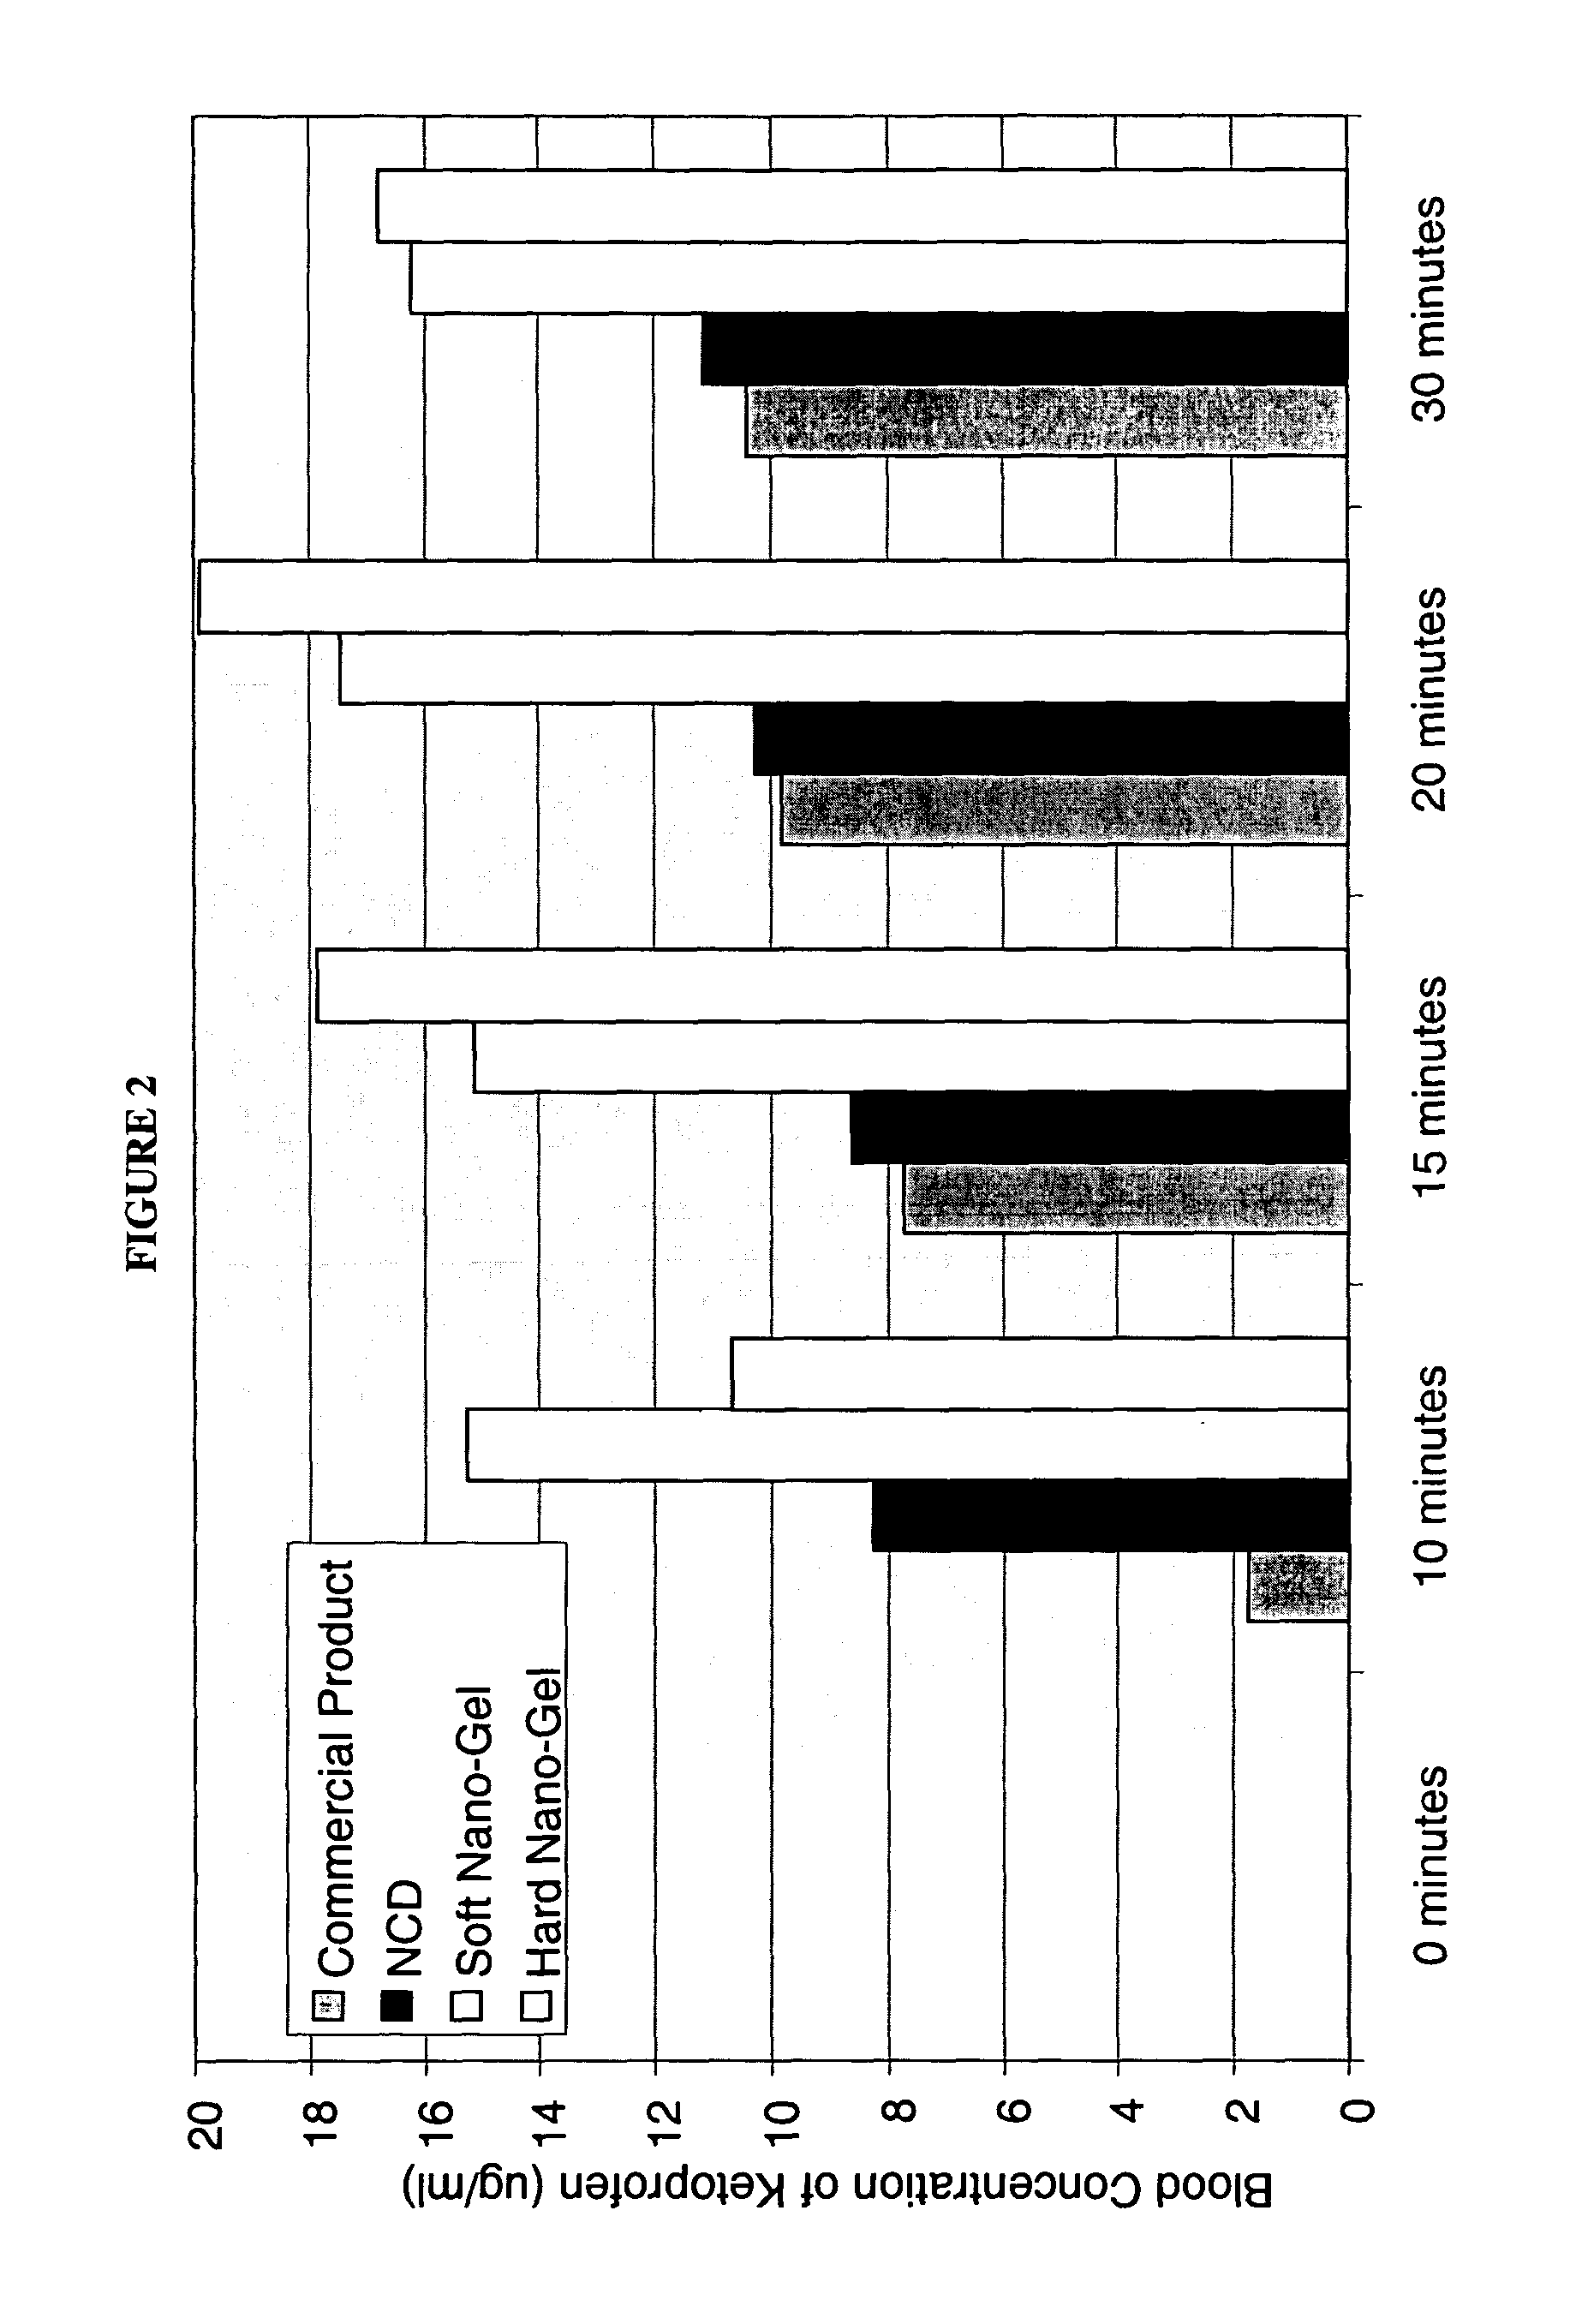 Gel stabilized nanoparticulate active agent compositions